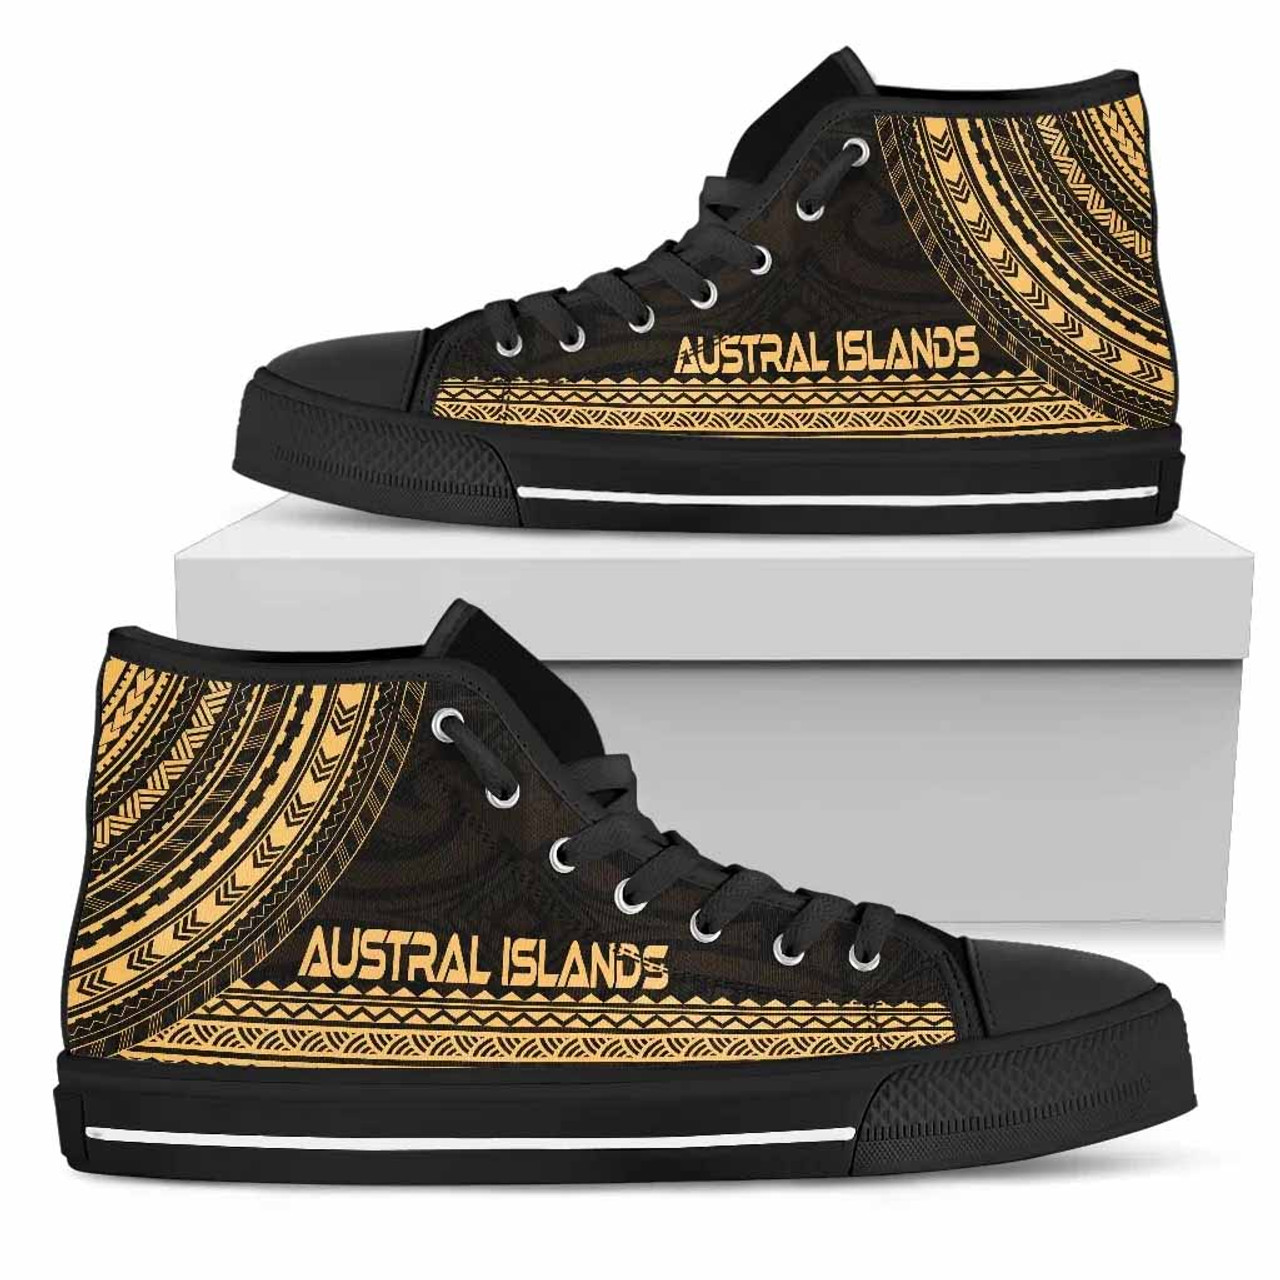 Austral Islands High Top Shoes - Polynesian Gold Chief Version 2